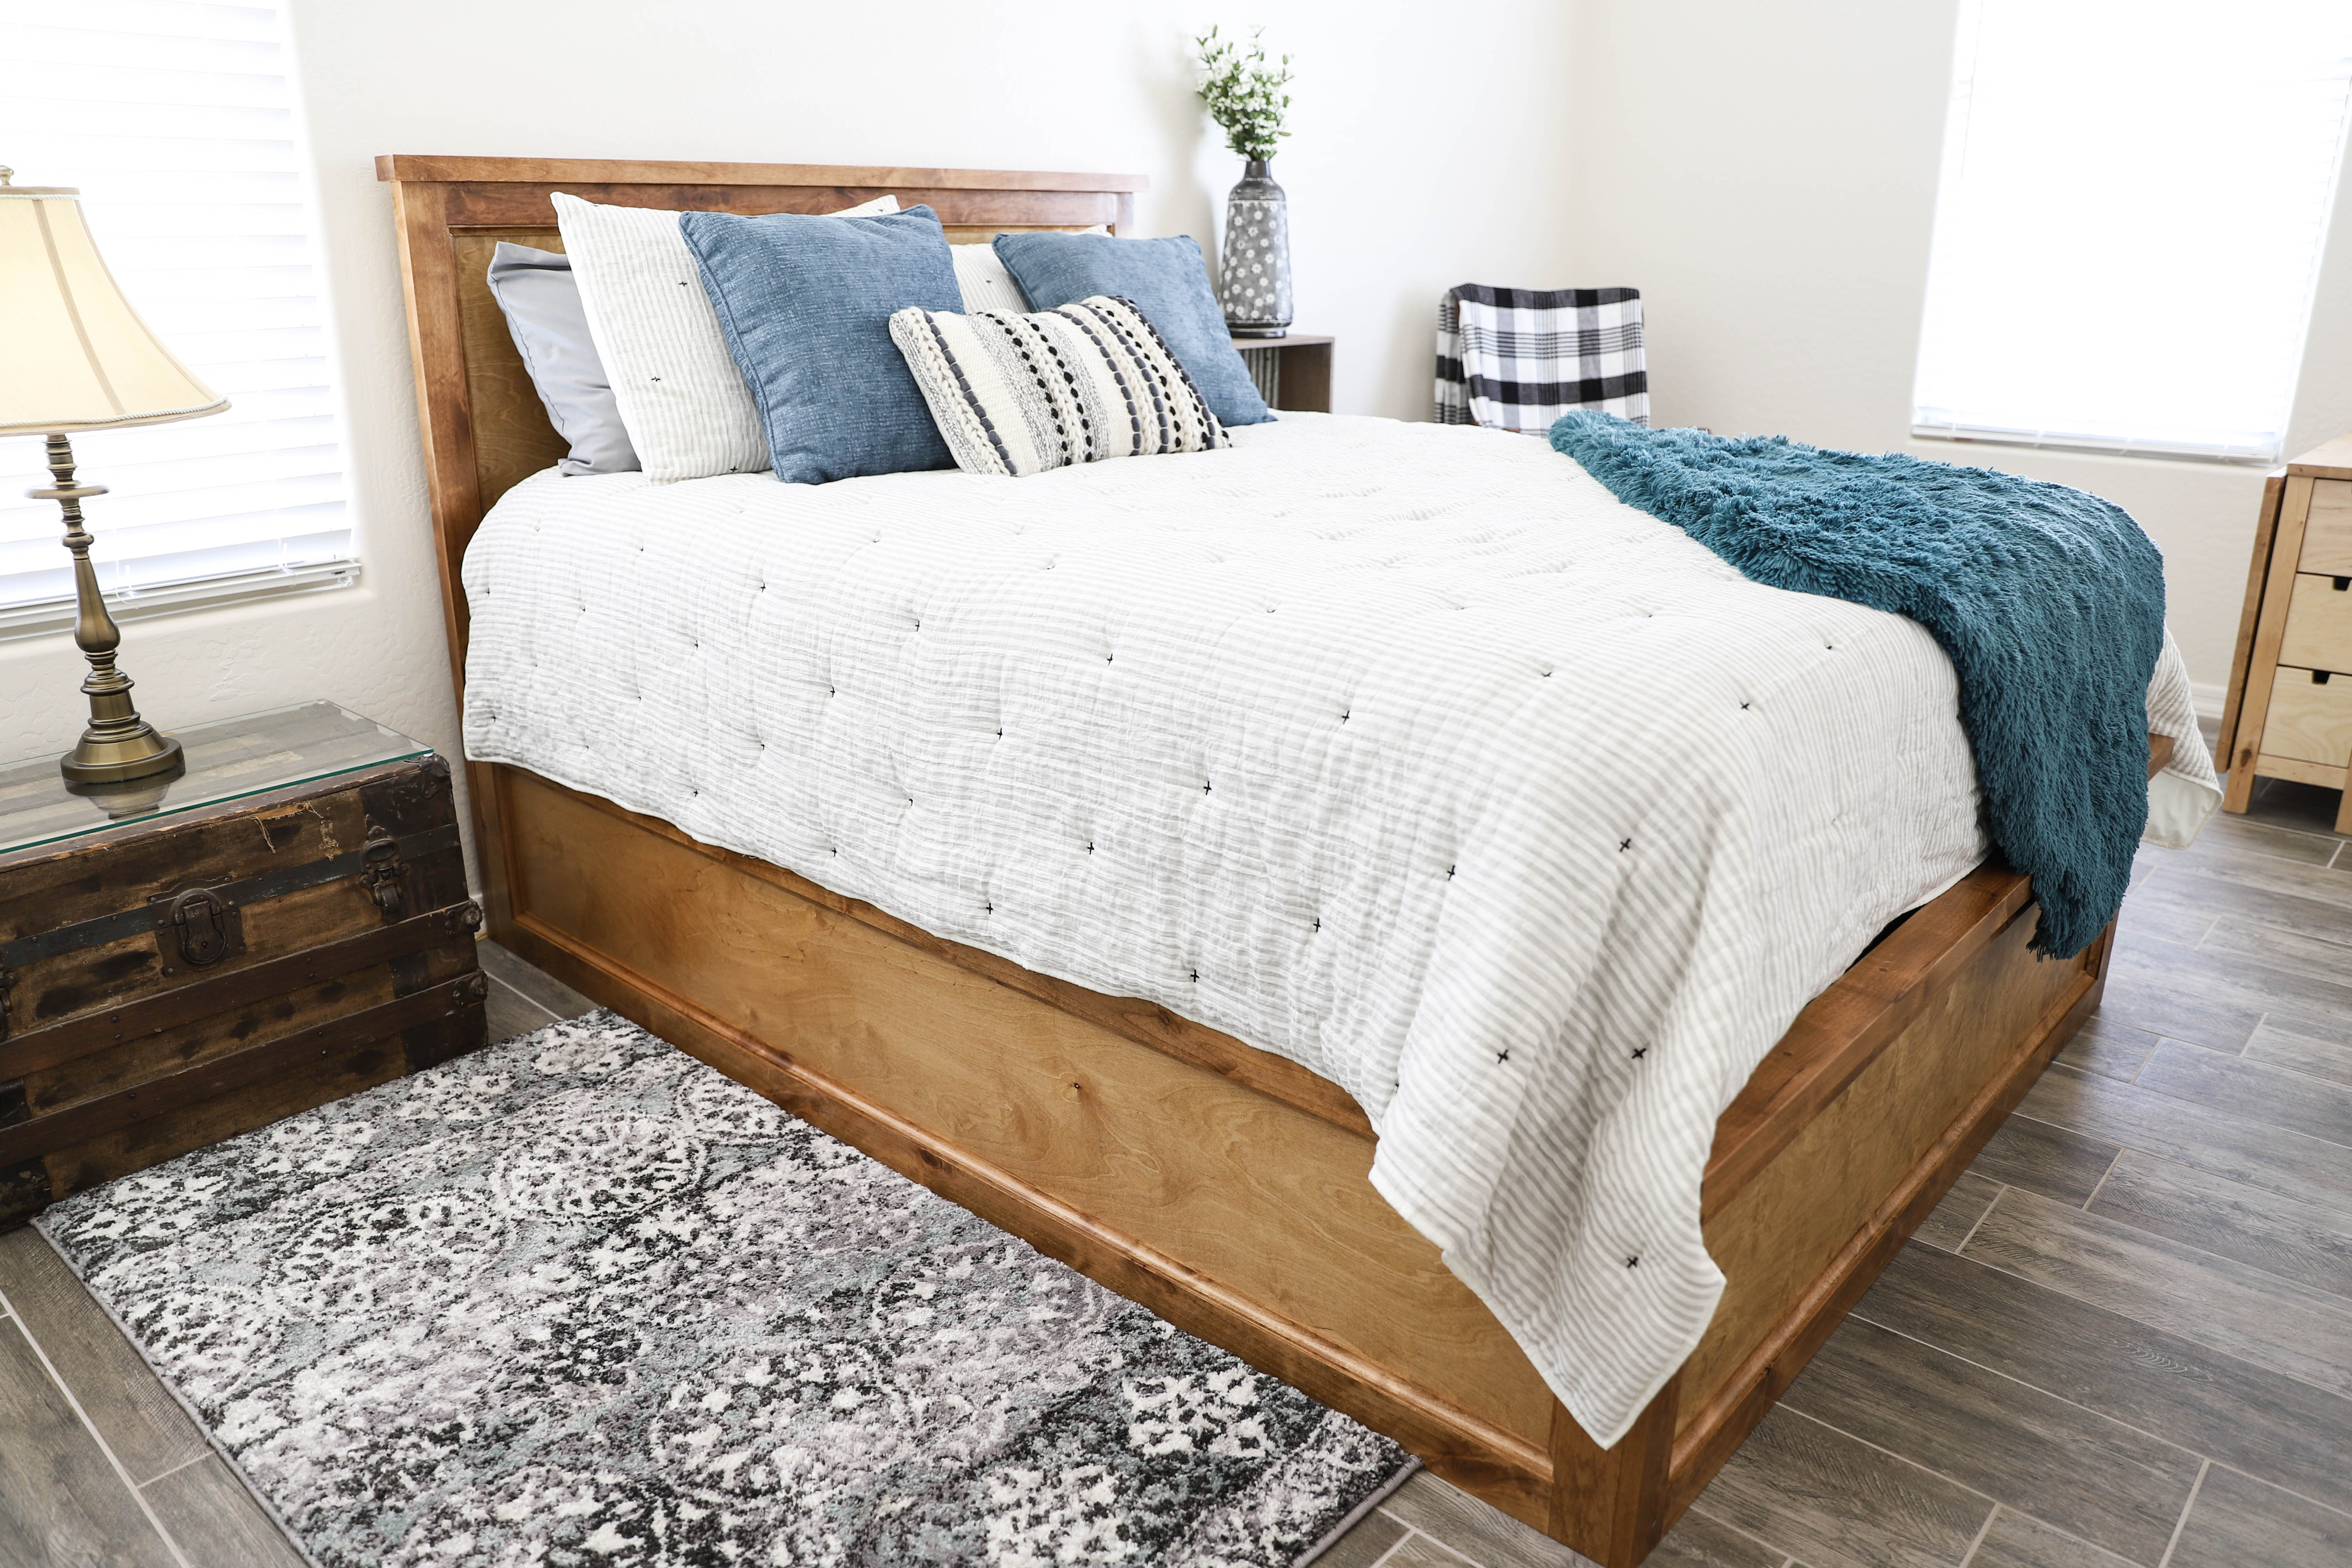 How To Build A Queen Size Storage Bed, How To Make Your Own Rustic Bed Frame With Storage